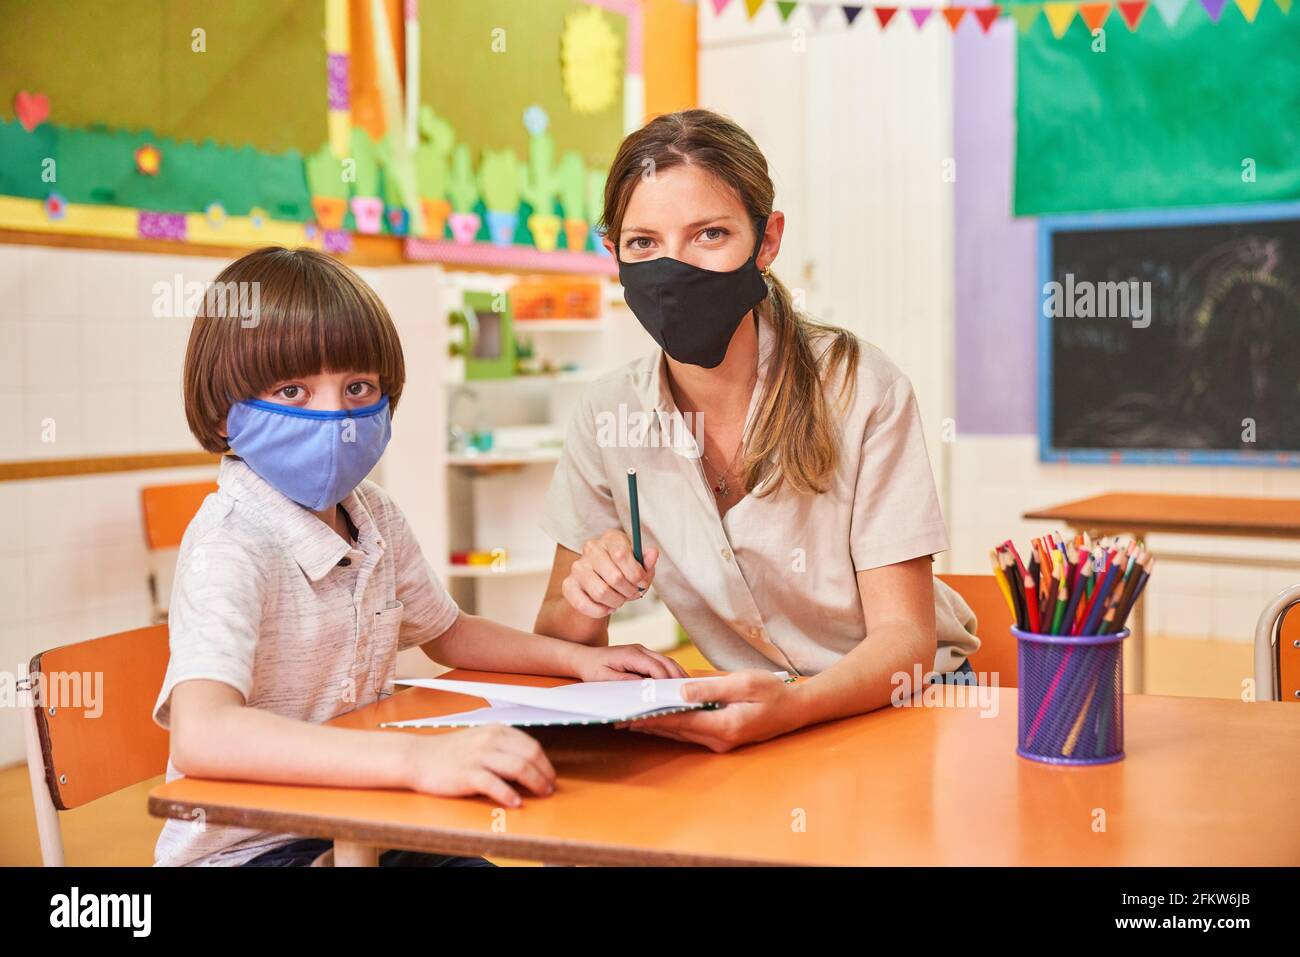 Childminder and child with face mask because of Covid-19 in preschool or elementary school Stock Photo